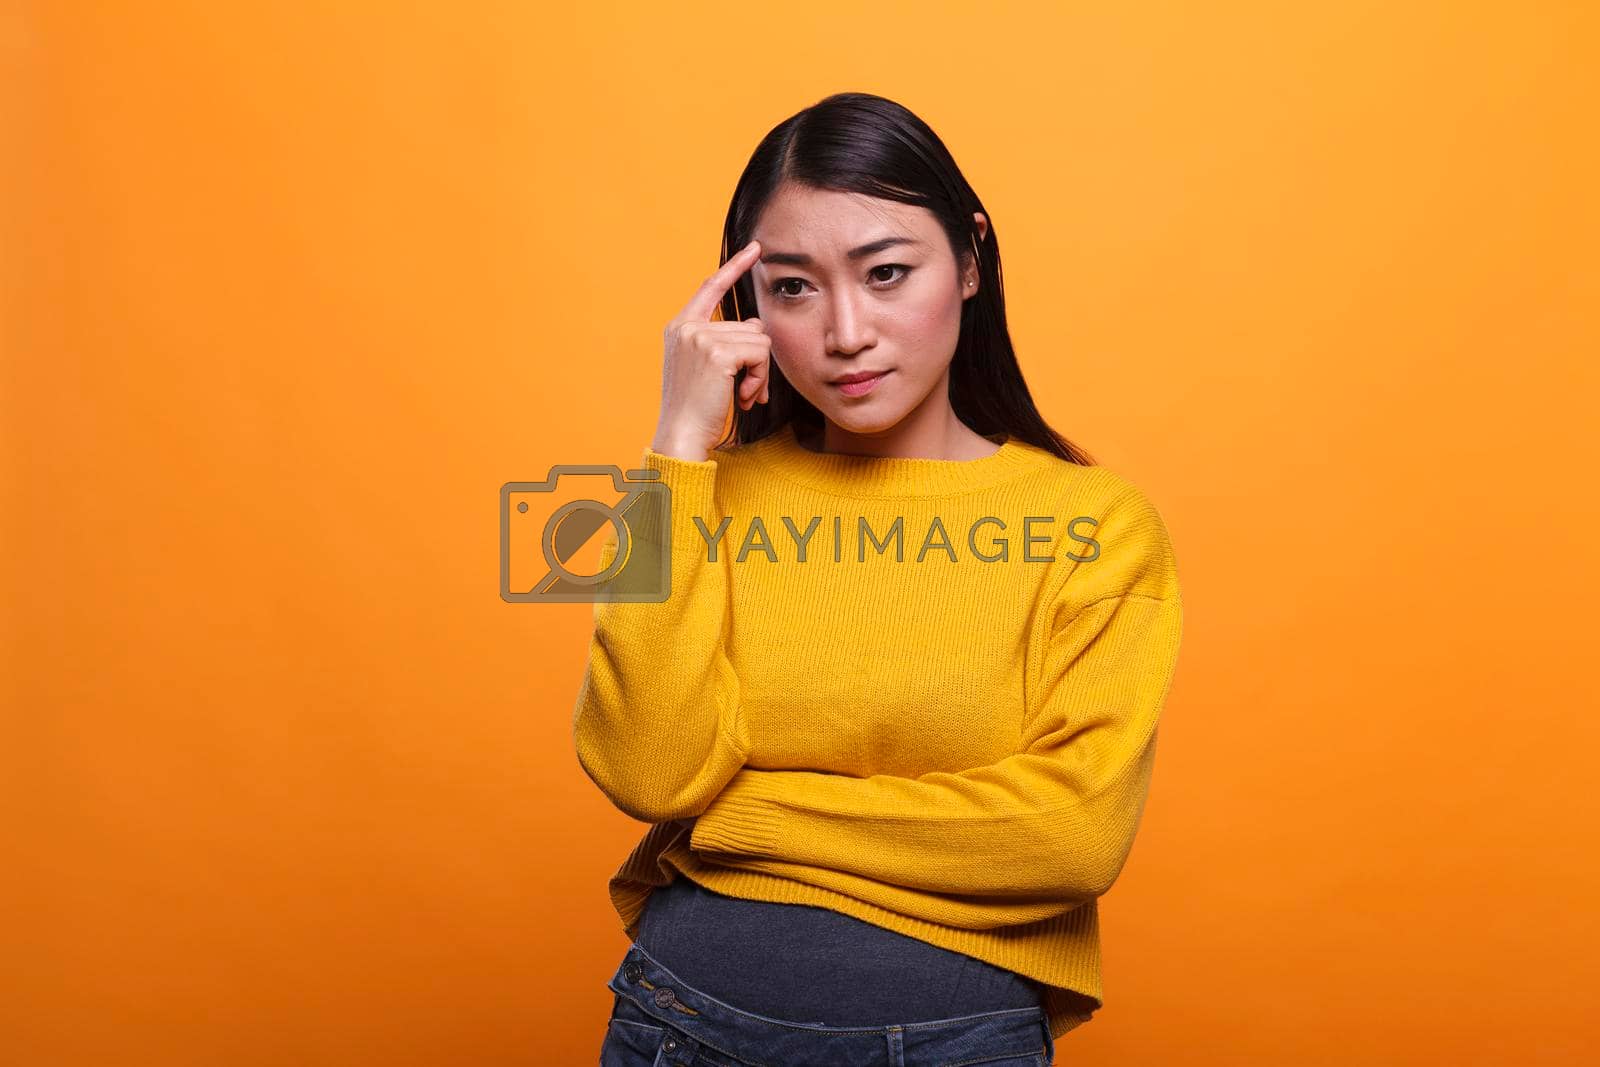 Royalty free image of Serious pensive woman focused on introspection thoughts in a contemplation state on orange background. by DCStudio